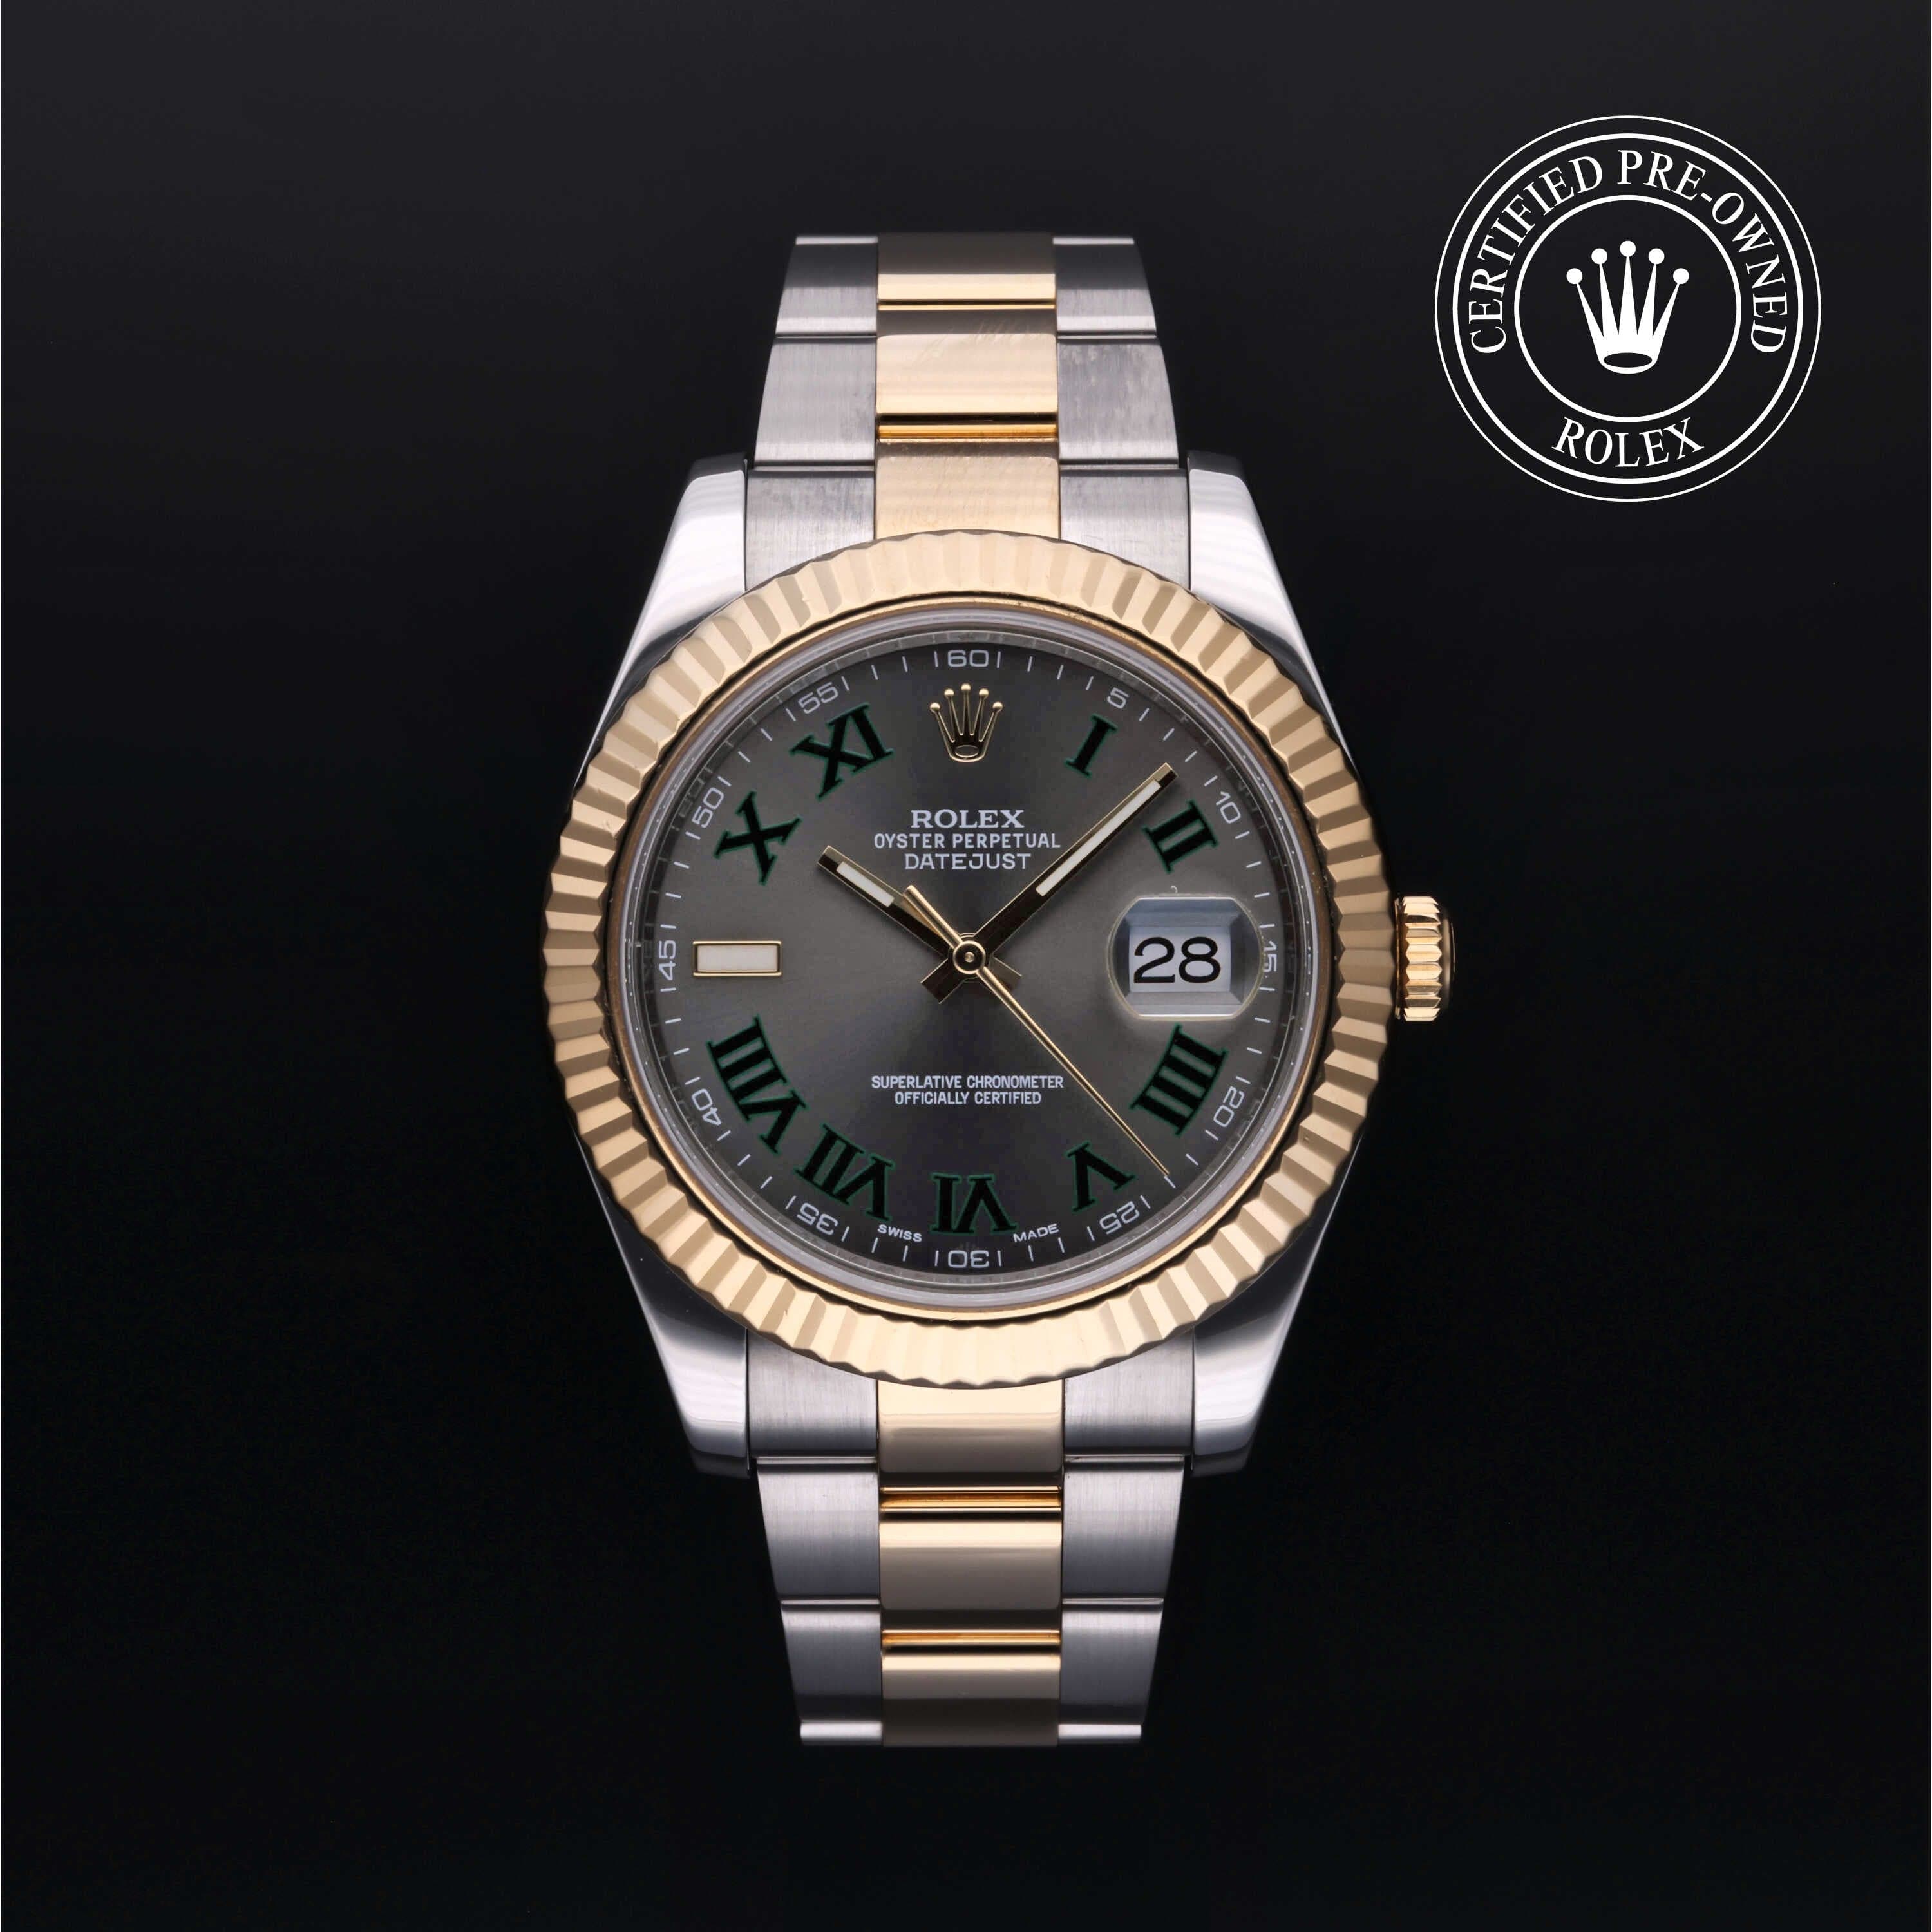 Rolex Certified Pre-Owned Datejust in Oyster, 41 mm, Stainless steel and yellow gold watch